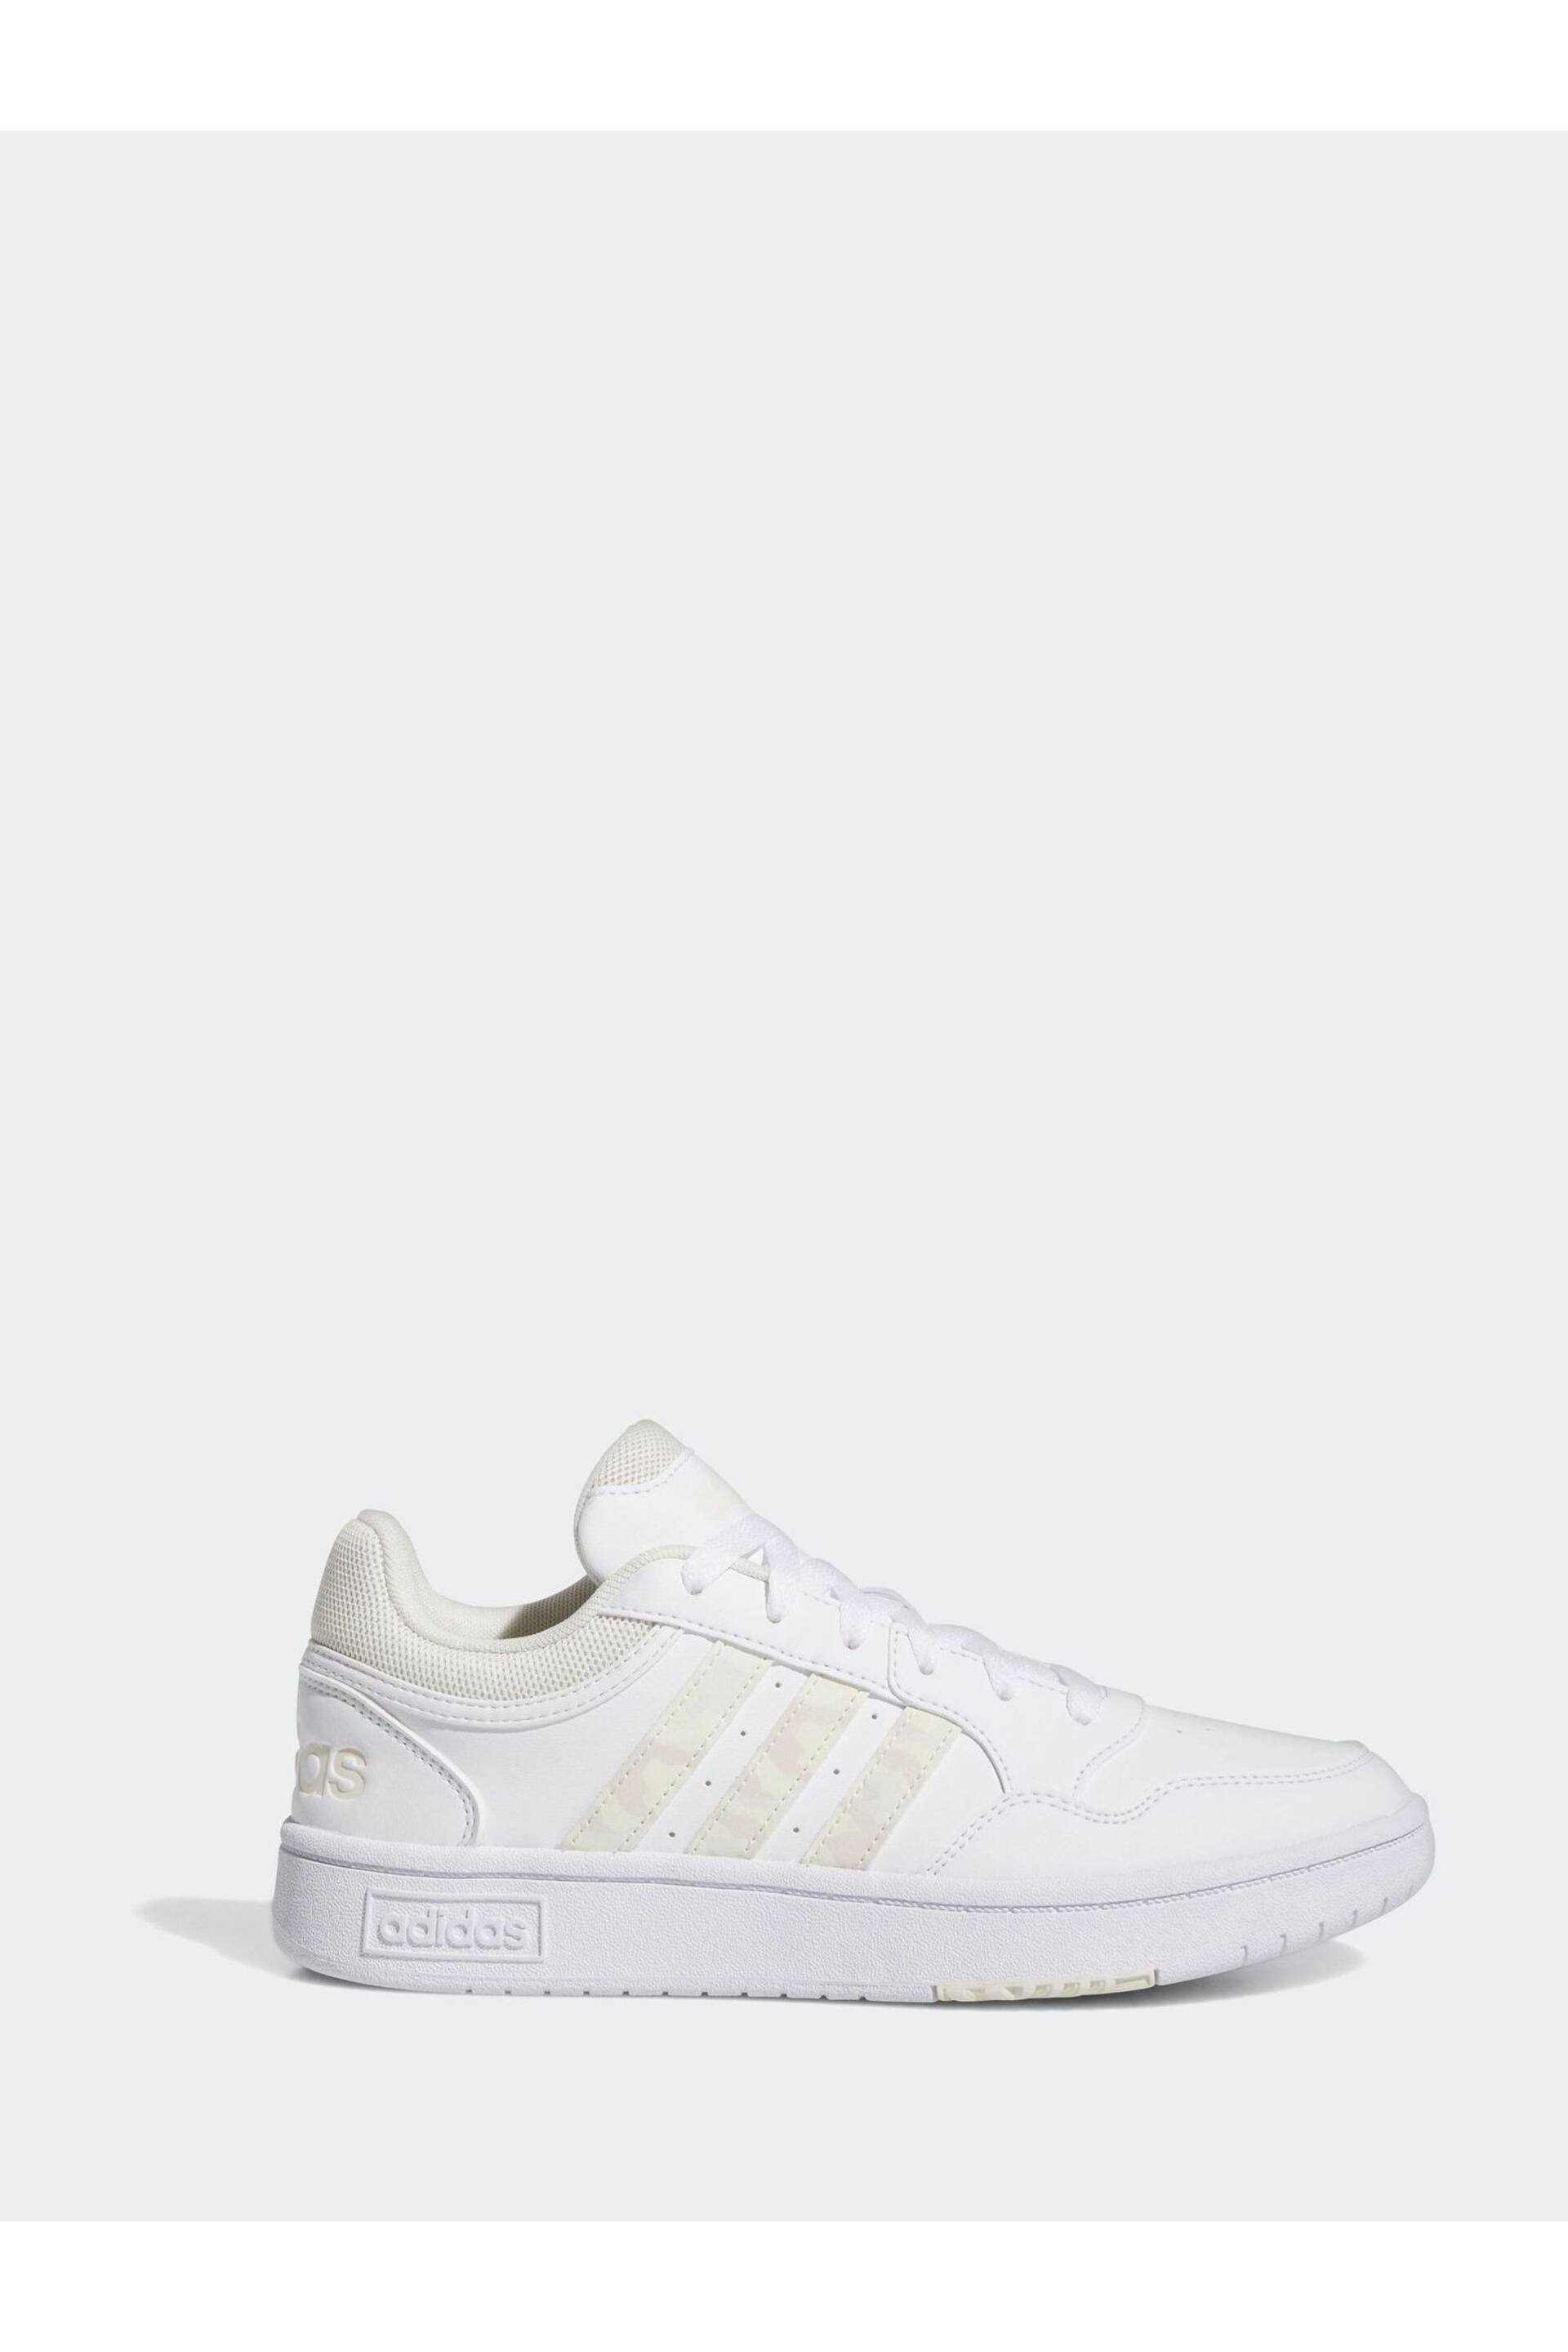 adidas White Originals Hoops 3 Trainers - Image 1 of 8